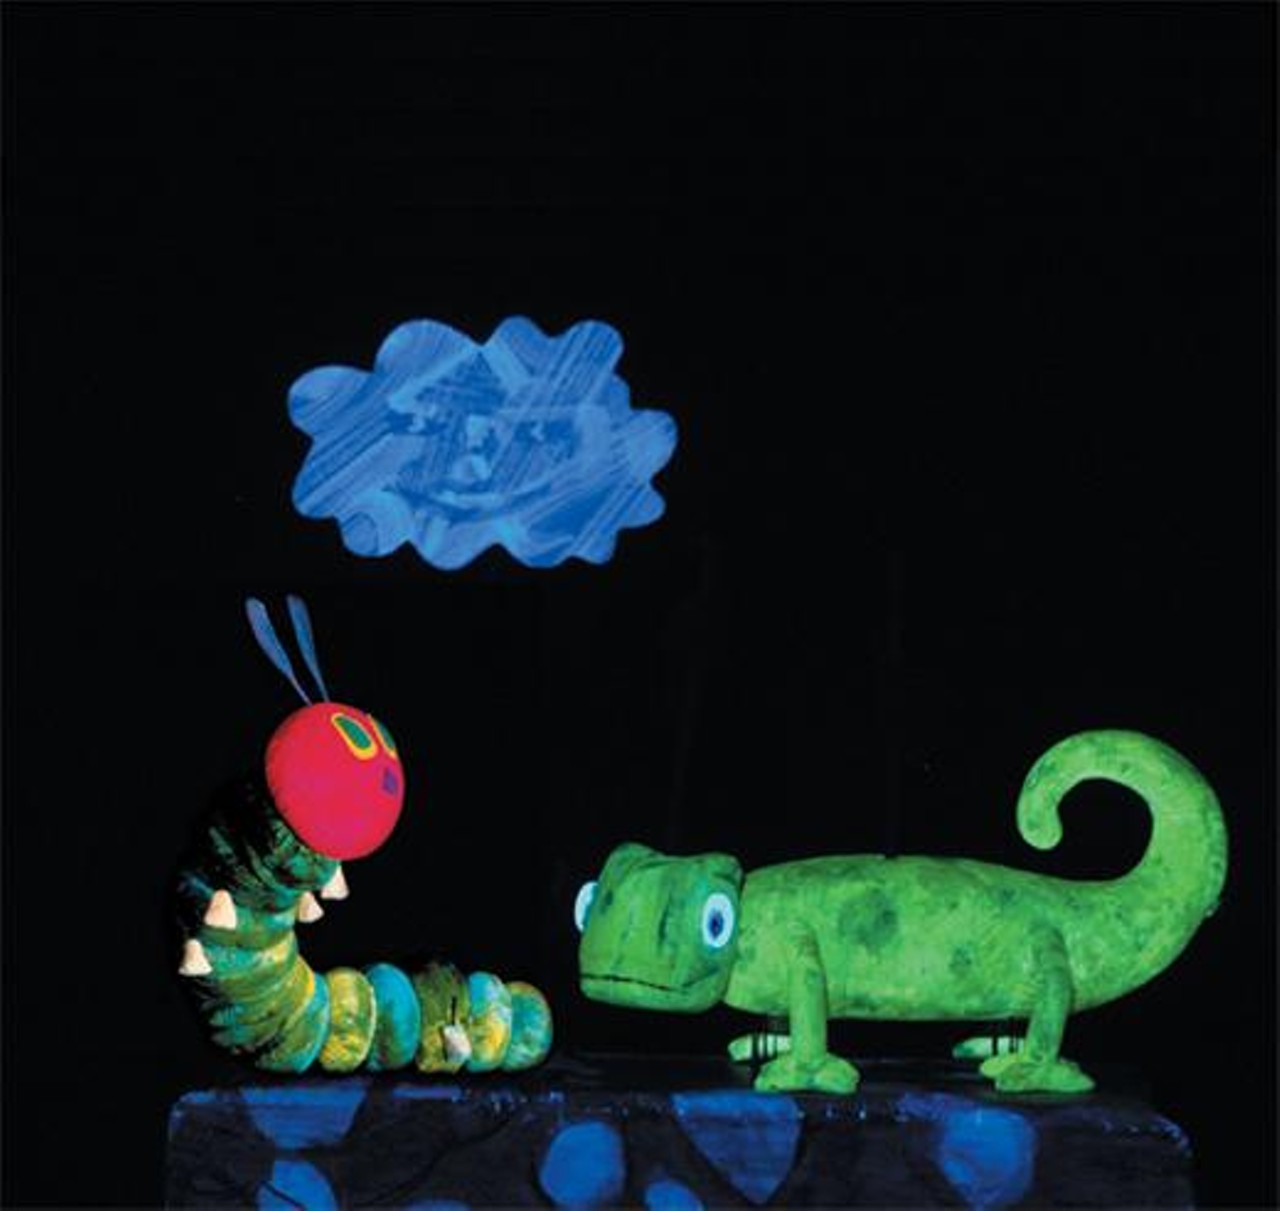 Sunday, Jan. 12, 2014. The Very Hungry Caterpillar & Other Eric Carle Favorites. The Very Hungry Caterpillar follows the wonderful adventures of a very tiny and very hungry caterpillar that progresses through an amazing variety of foods towards his eventual metamorphosis into a beautiful butterfly. Also featuring Little Cloud and The Mixed-Up Chameleon. Music Hall Center for the Performing Arts, 350 Madison Ave. $10 children / $20 adults.